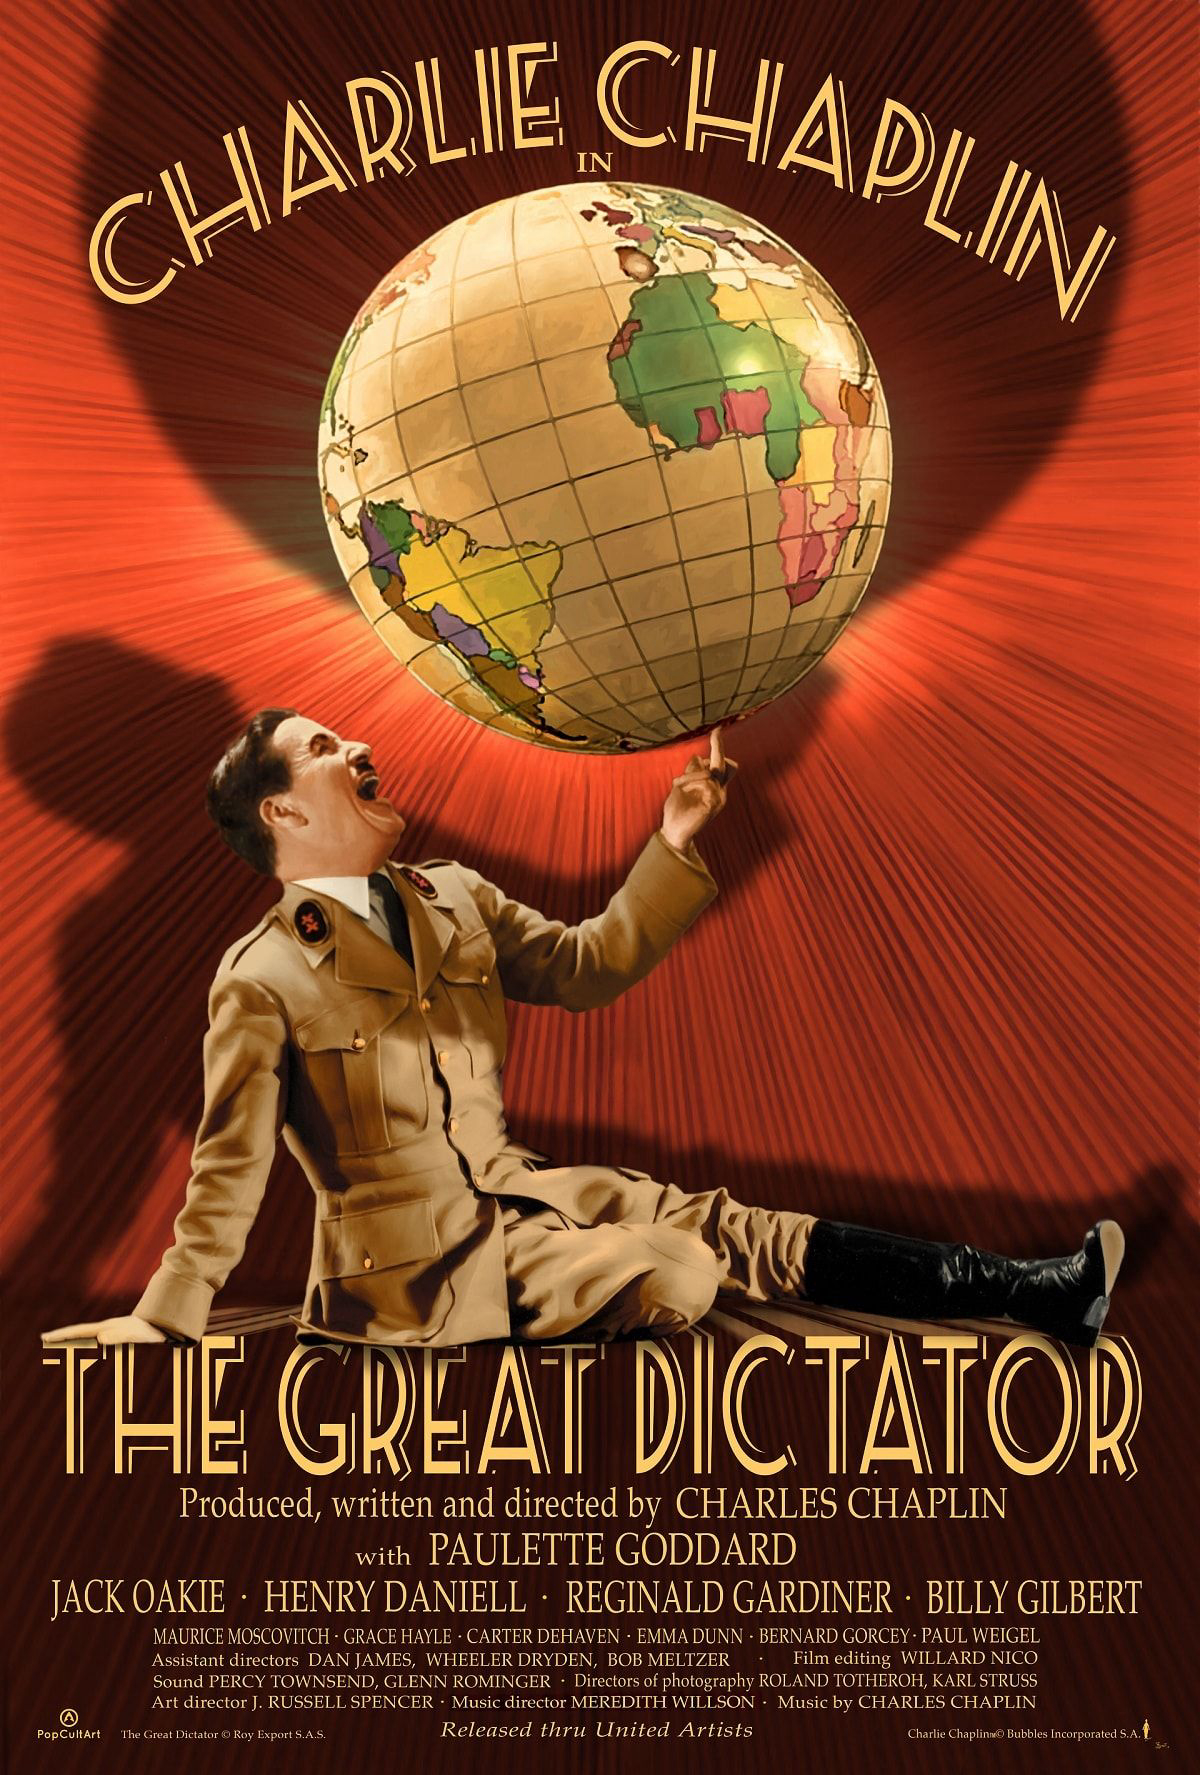 The Great Dictator / The Great Dictator (1941)